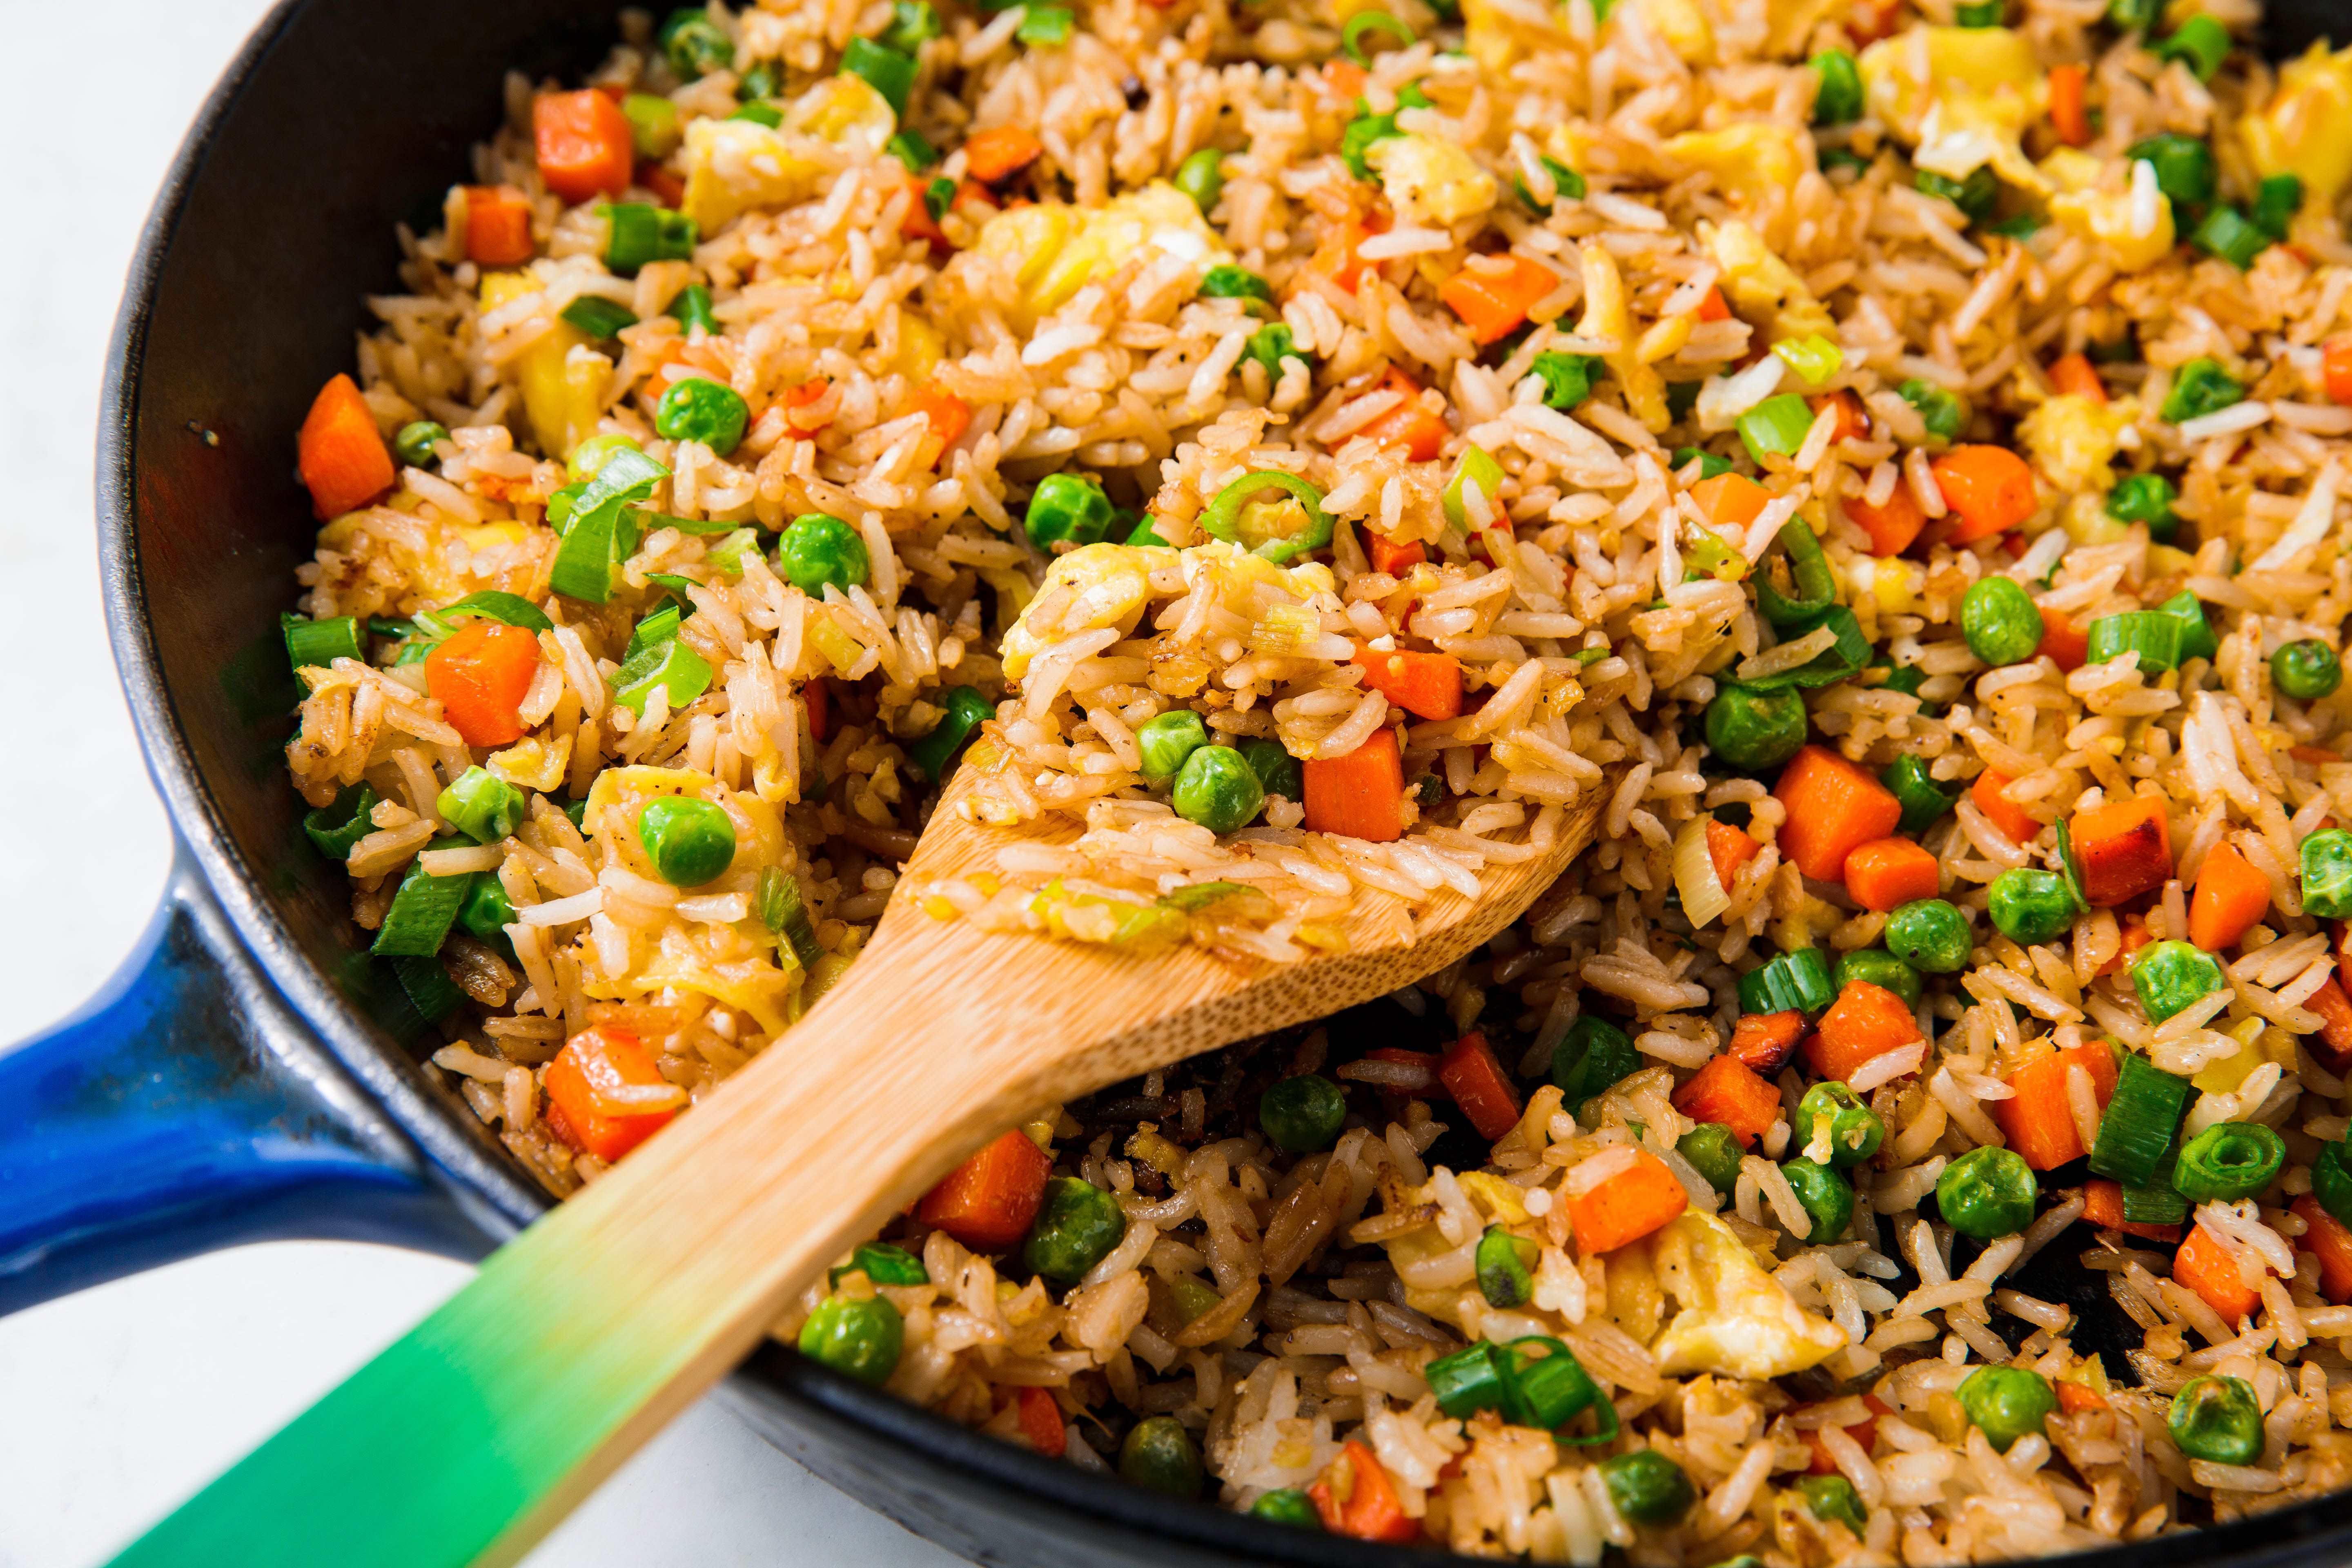 Best Fried Rice Recipe How To Make Perfect Fried Rice.